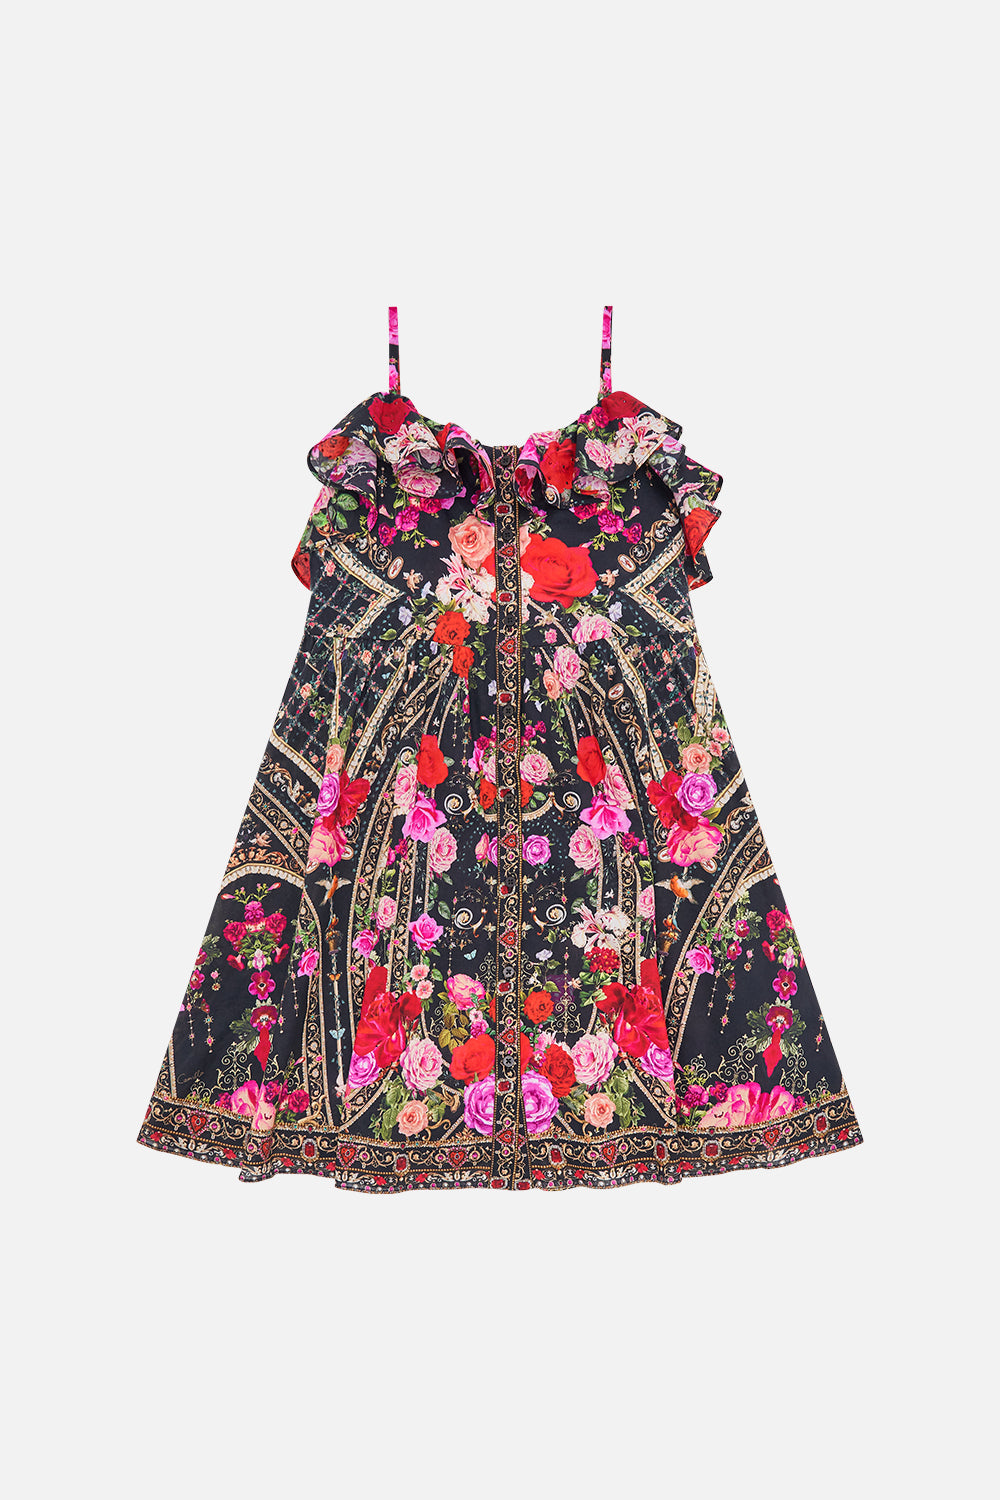 Milla By CAMILLA kids frill dress with bow in Reservation For Love print 